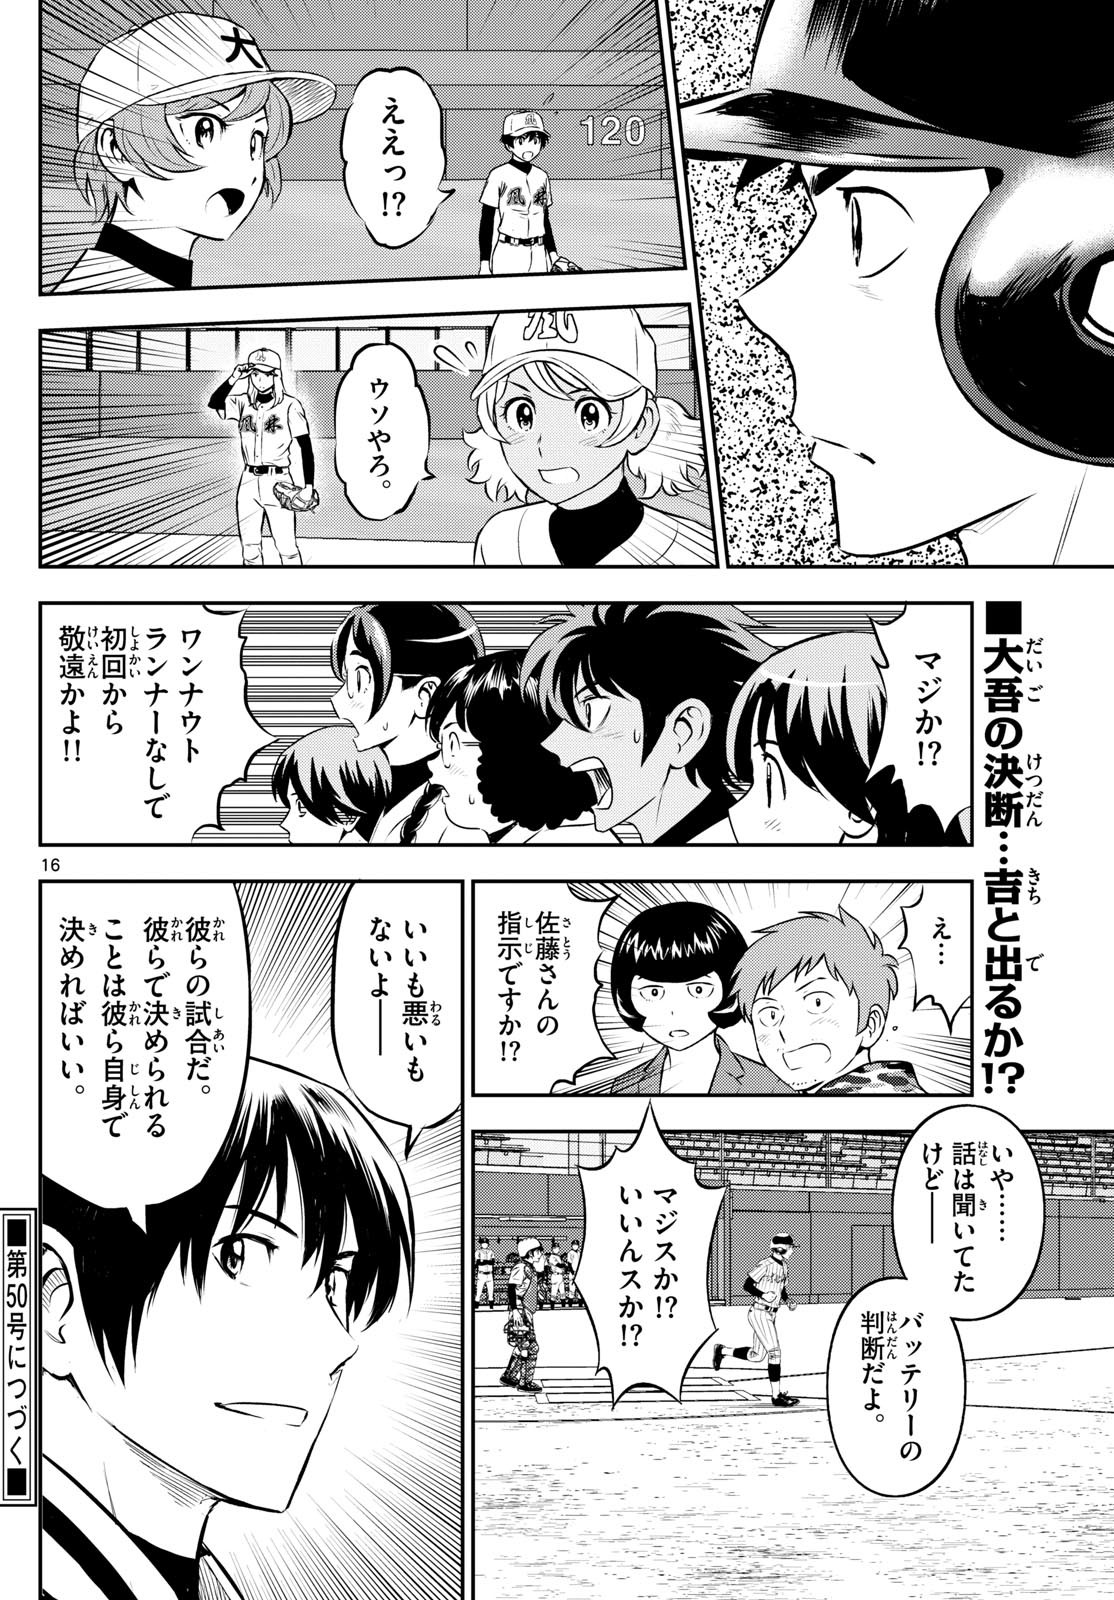 Major 2nd - メジャーセカンド - Chapter 266 - Page 16